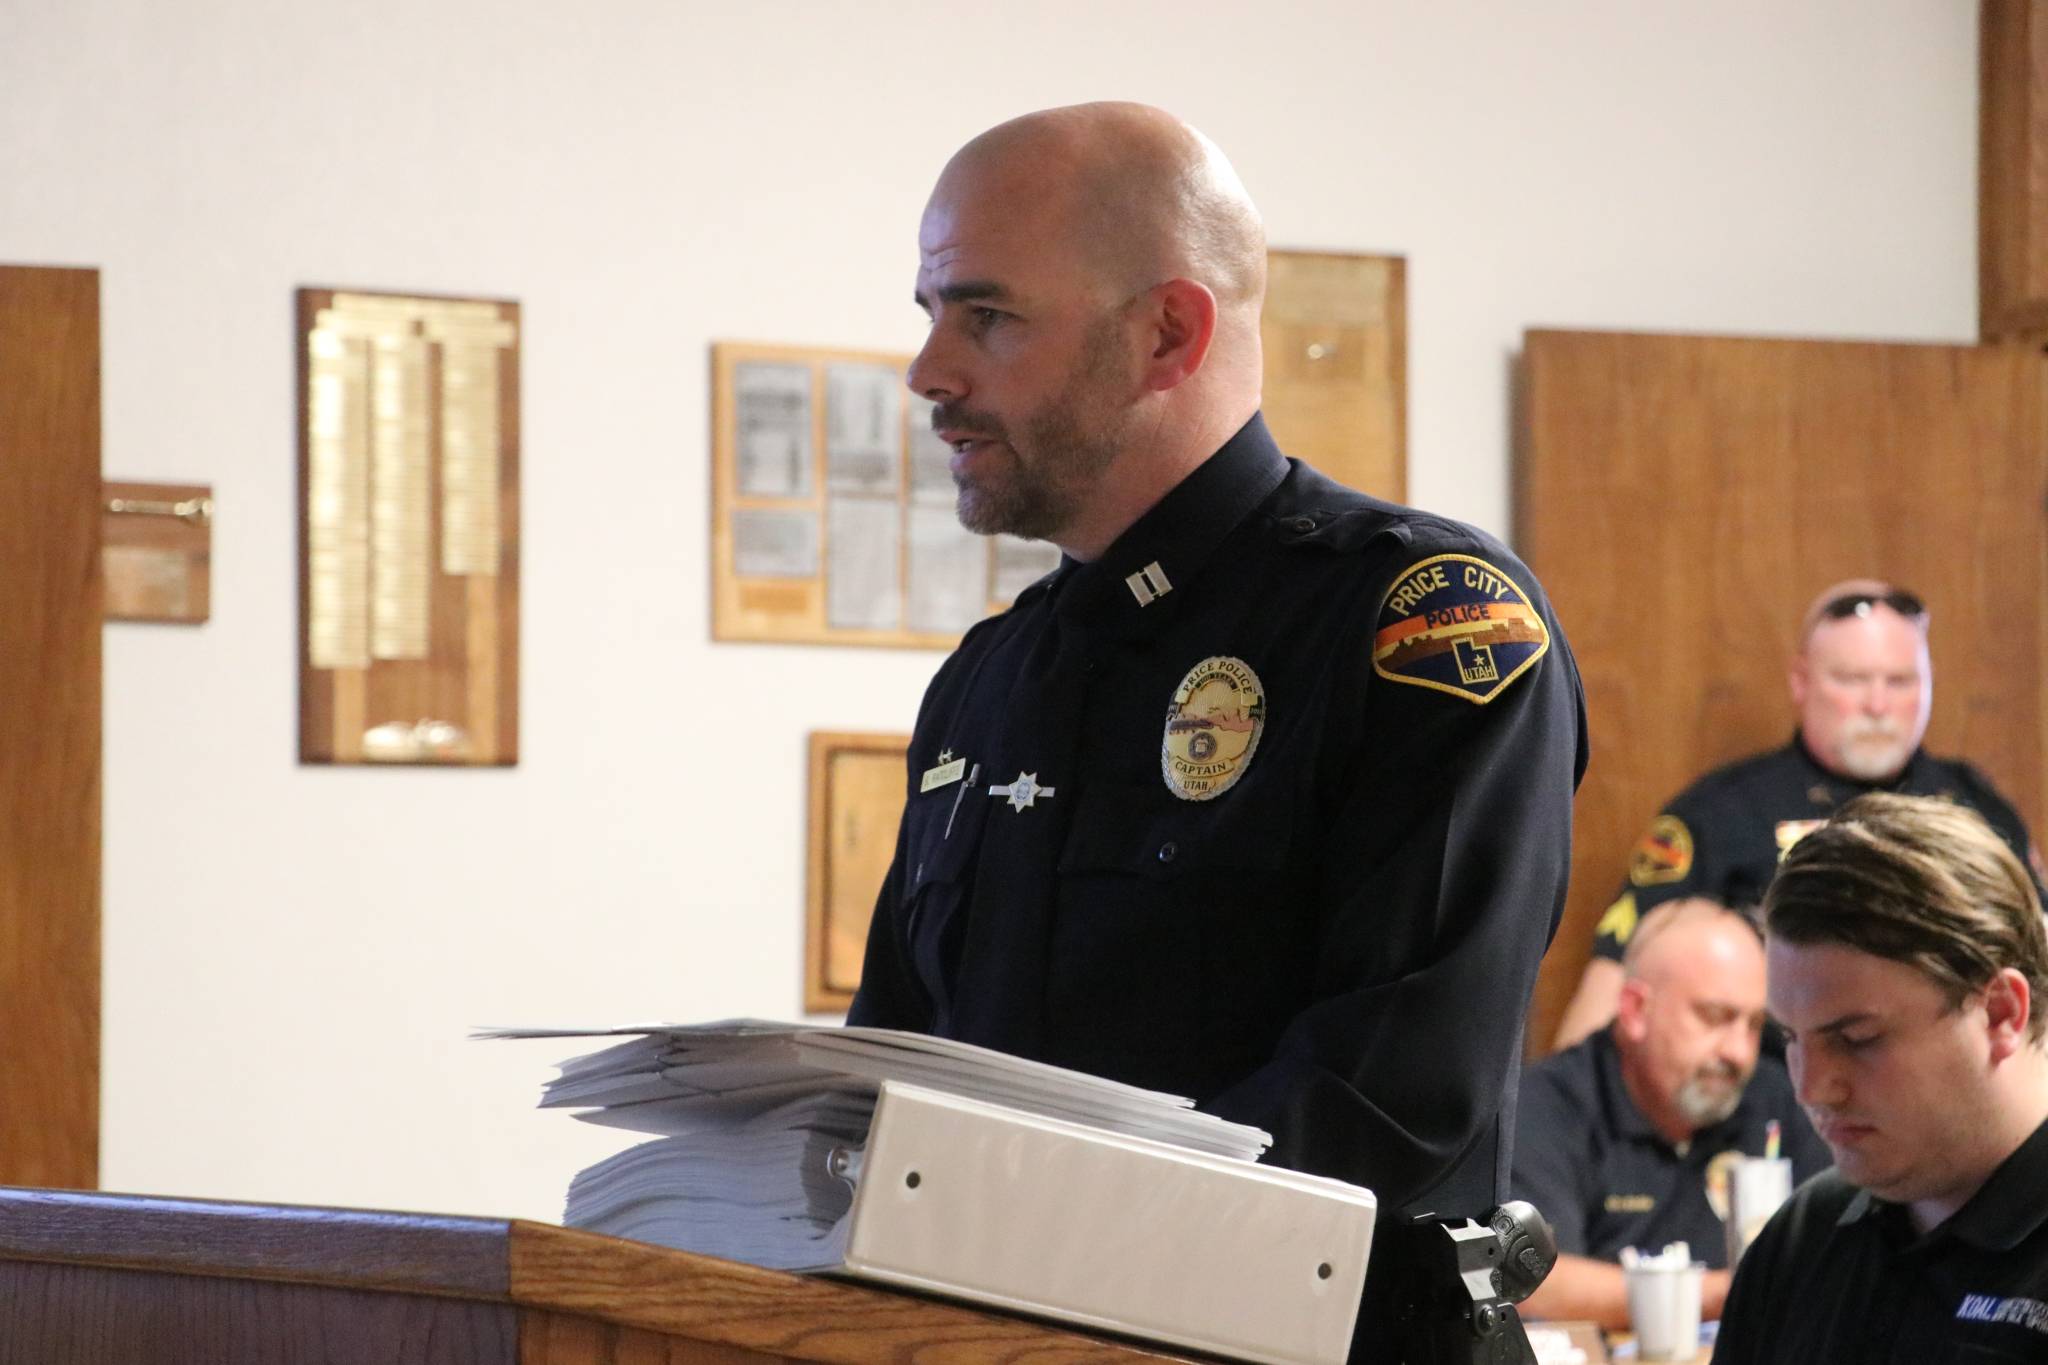 Price City Police Captain Continues to Raise Concerns